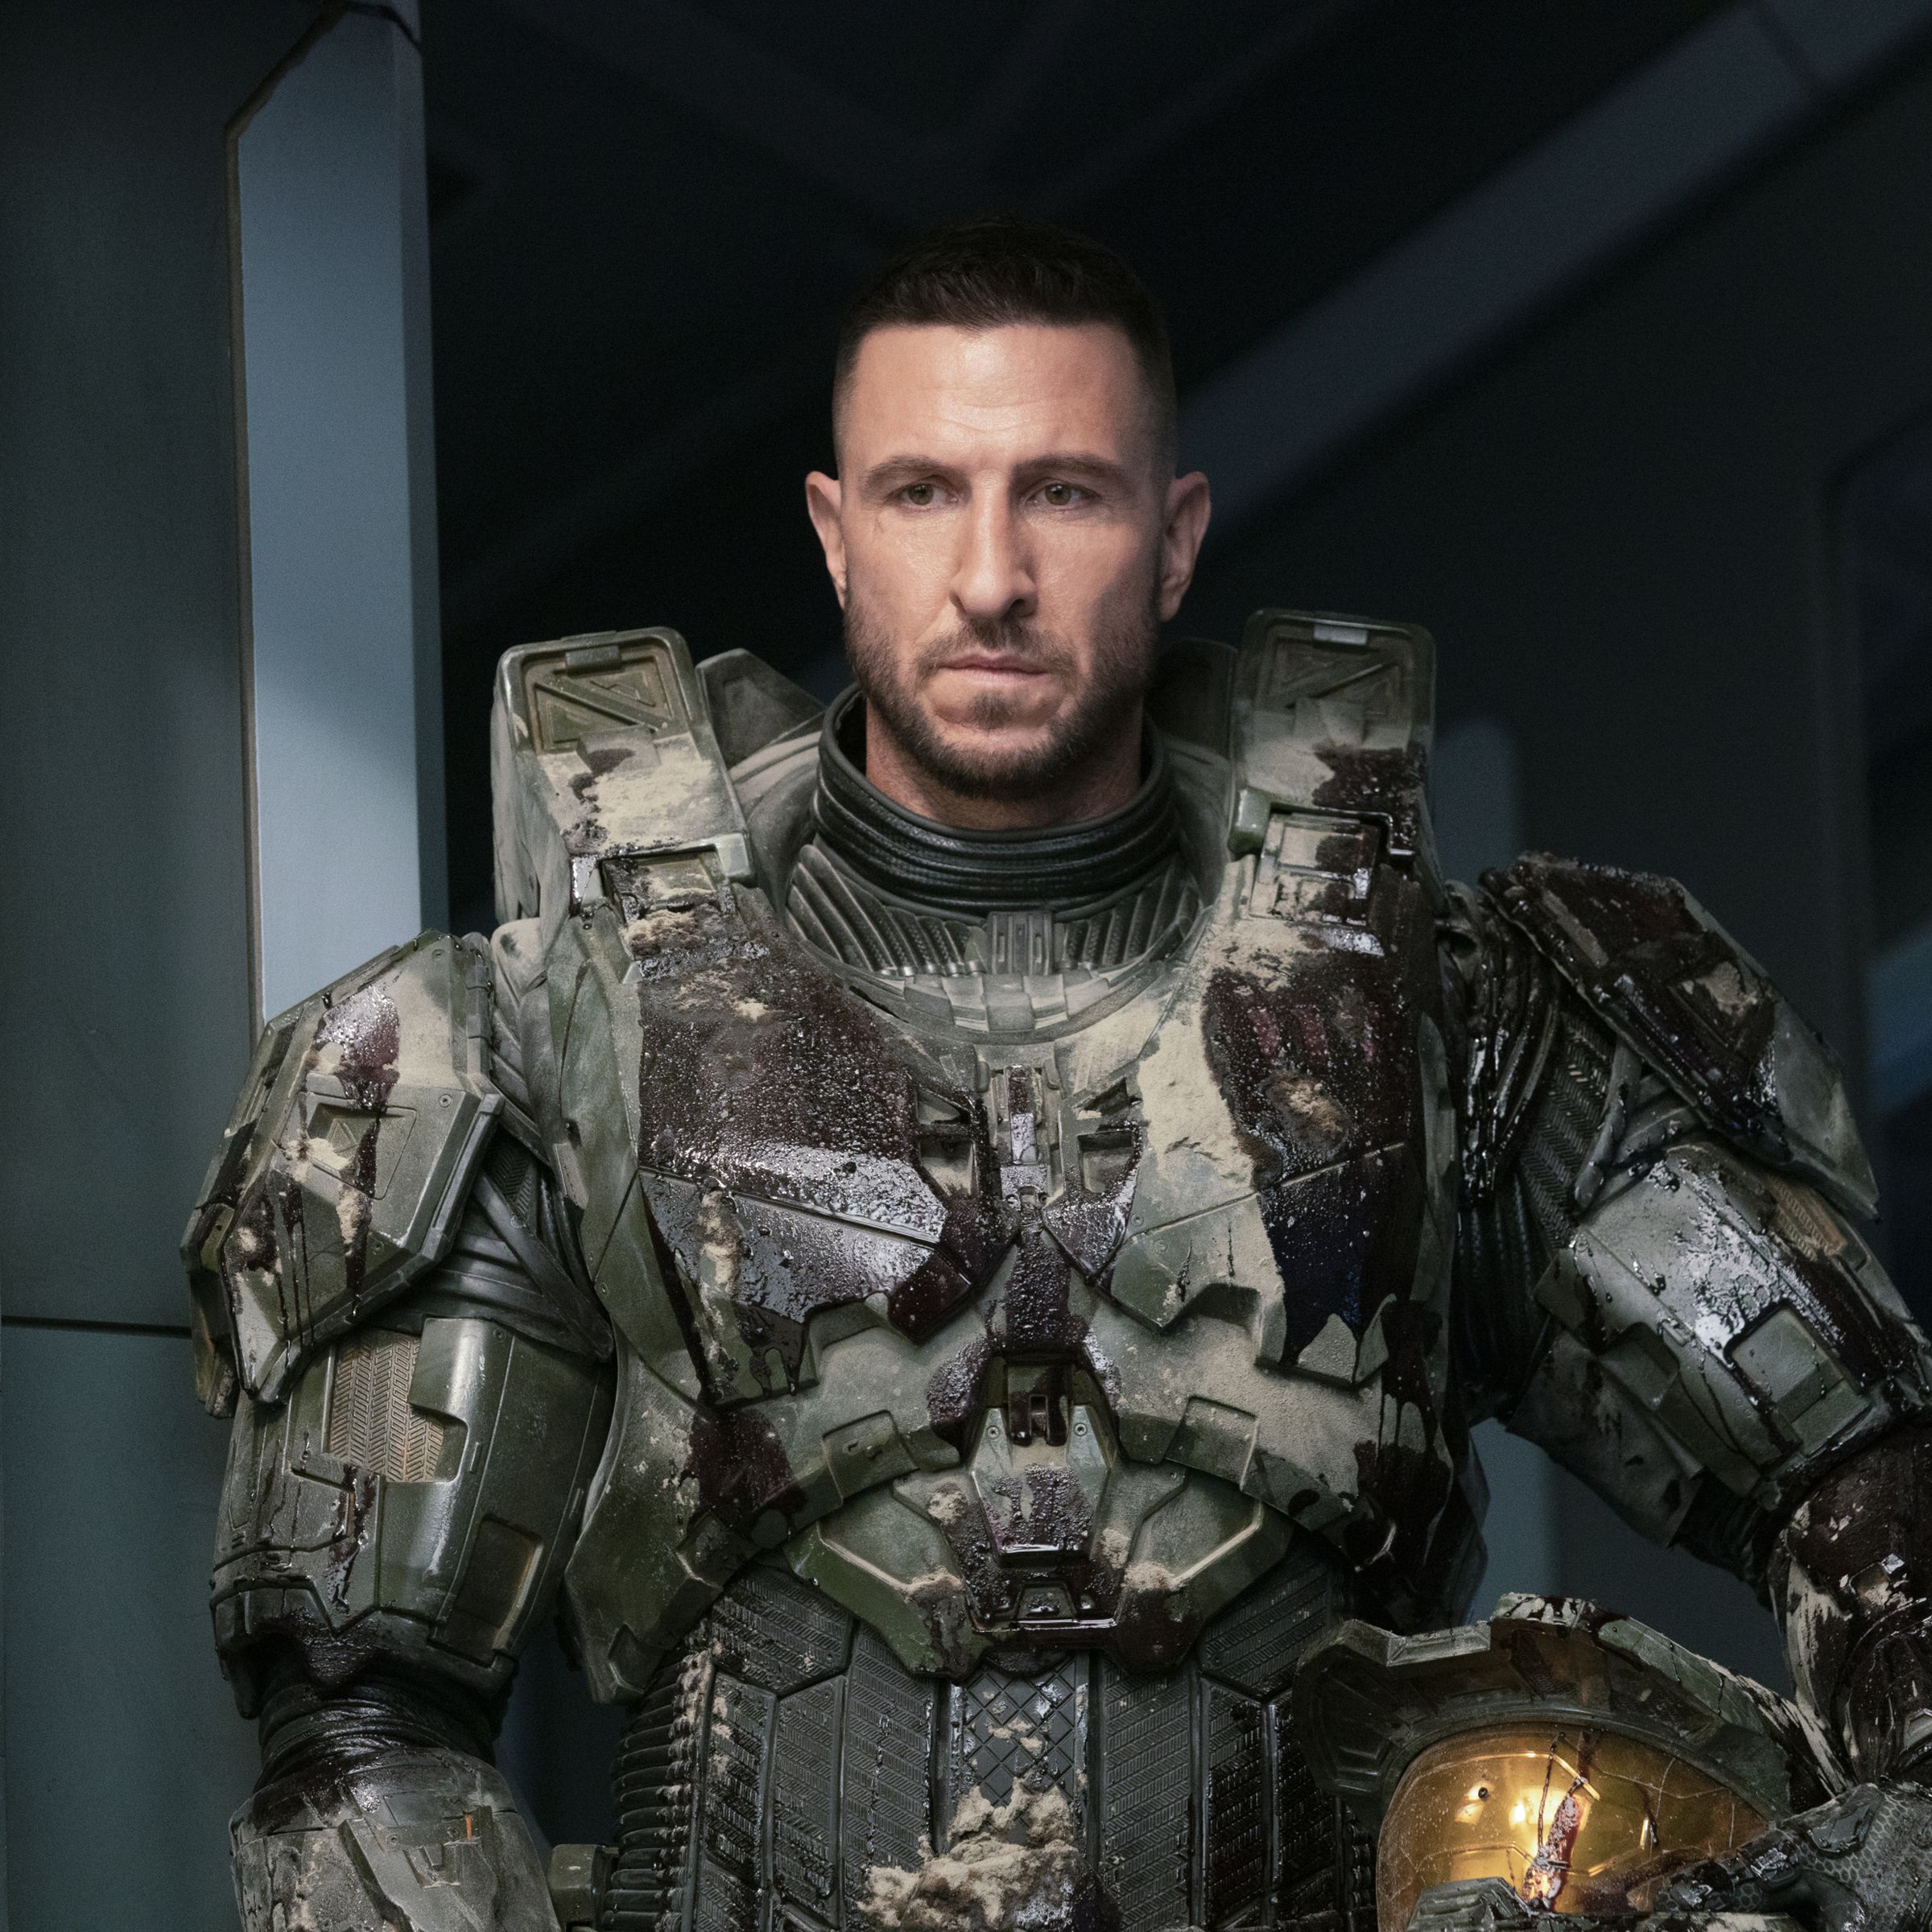 Photo from Halo season 1, episode 6, “Solace,” featuring Pablo Schreiber in the iconic Mjolnir armor.